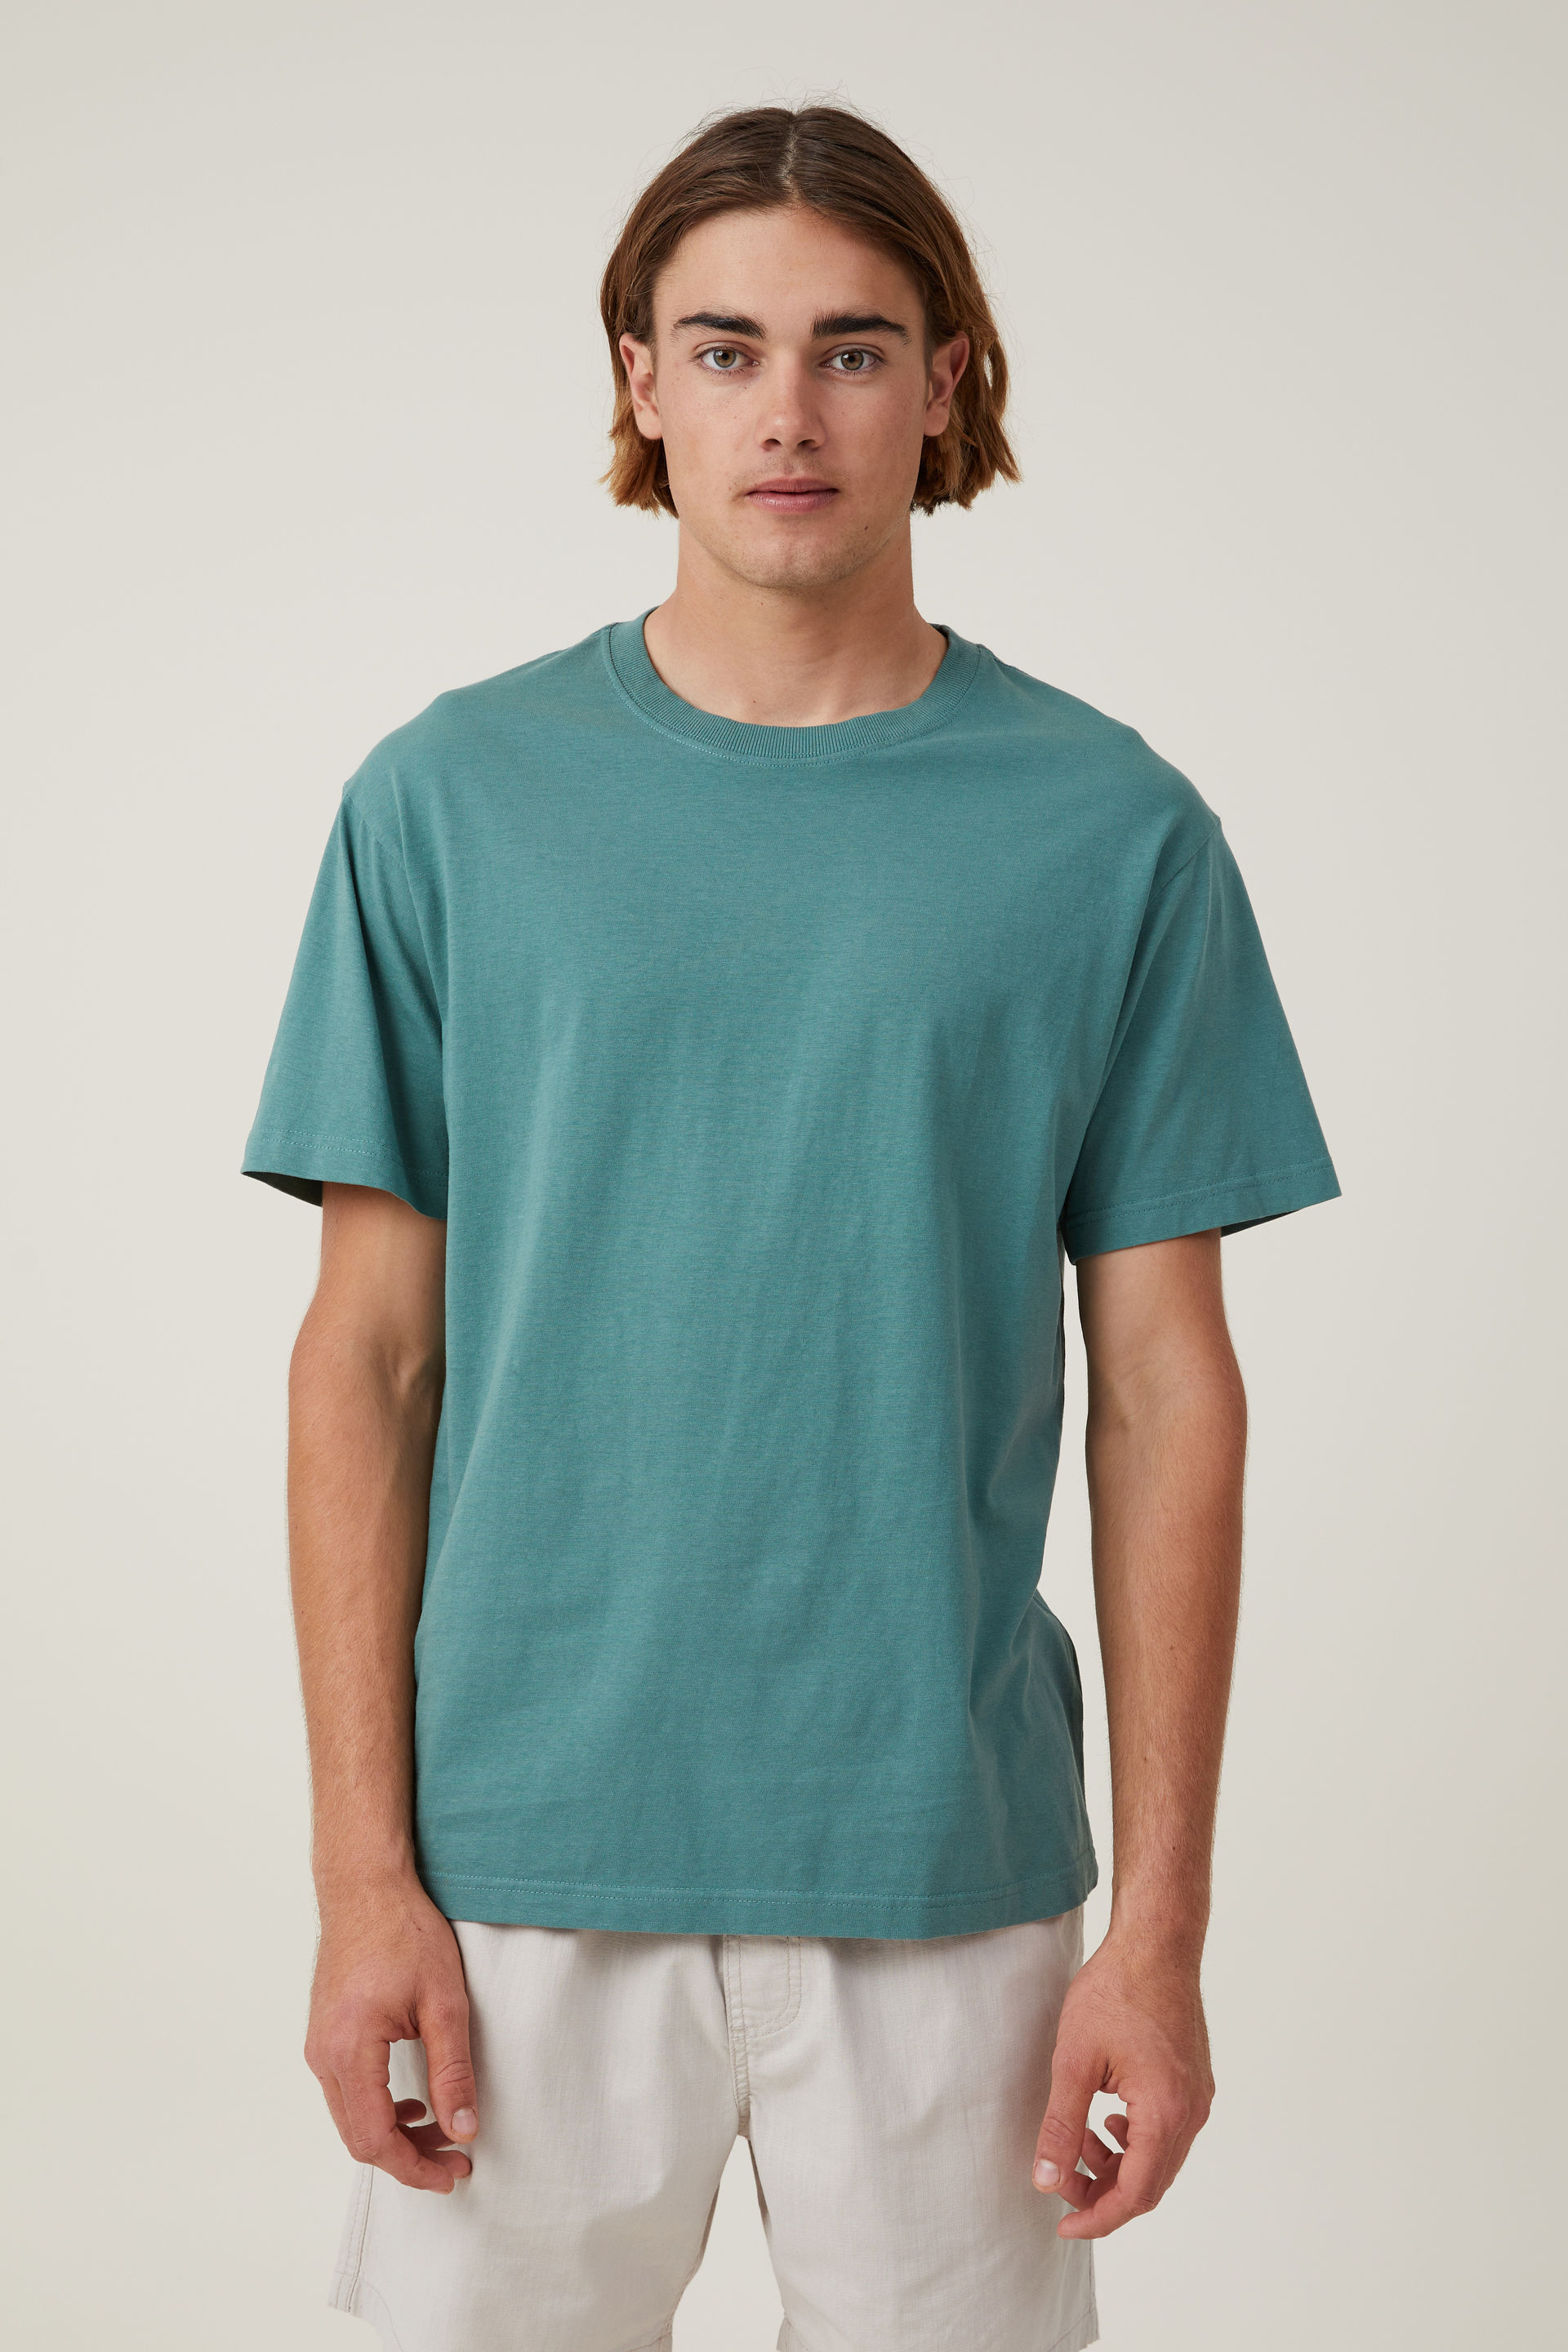 Cotton On Men - Organic Loose Fit T-Shirt - Faded teal